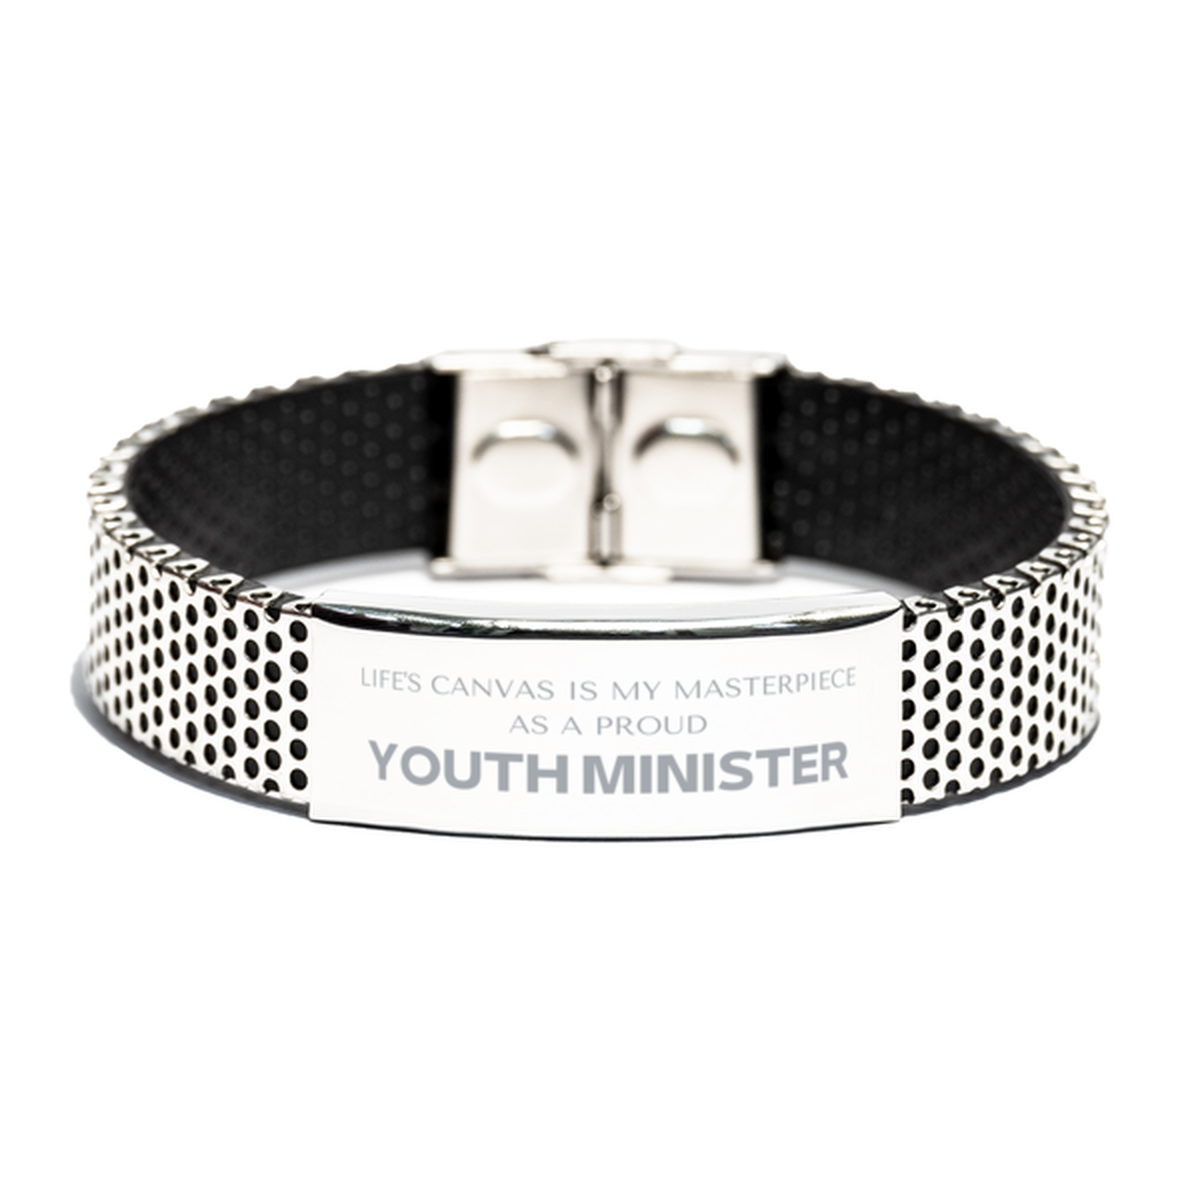 Proud Youth Minister Gifts, Life's canvas is my masterpiece, Epic Birthday Christmas Unique Stainless Steel Bracelet For Youth Minister, Coworkers, Men, Women, Friends